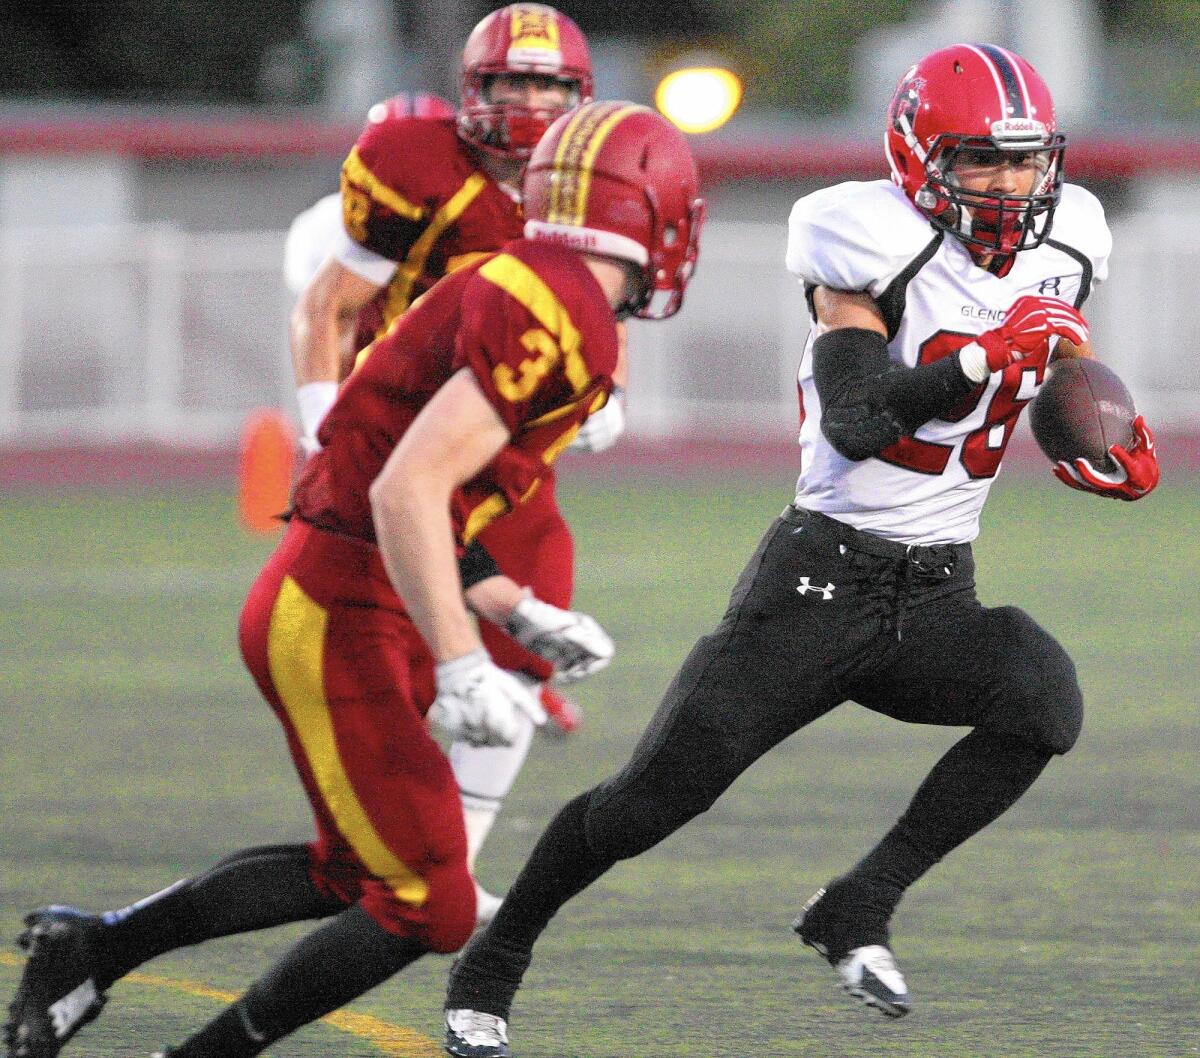 Glendale Daniel Jung runs the ball with La Cañada's Andrew Gunter defending during a game on Friday, September 12, 2014.